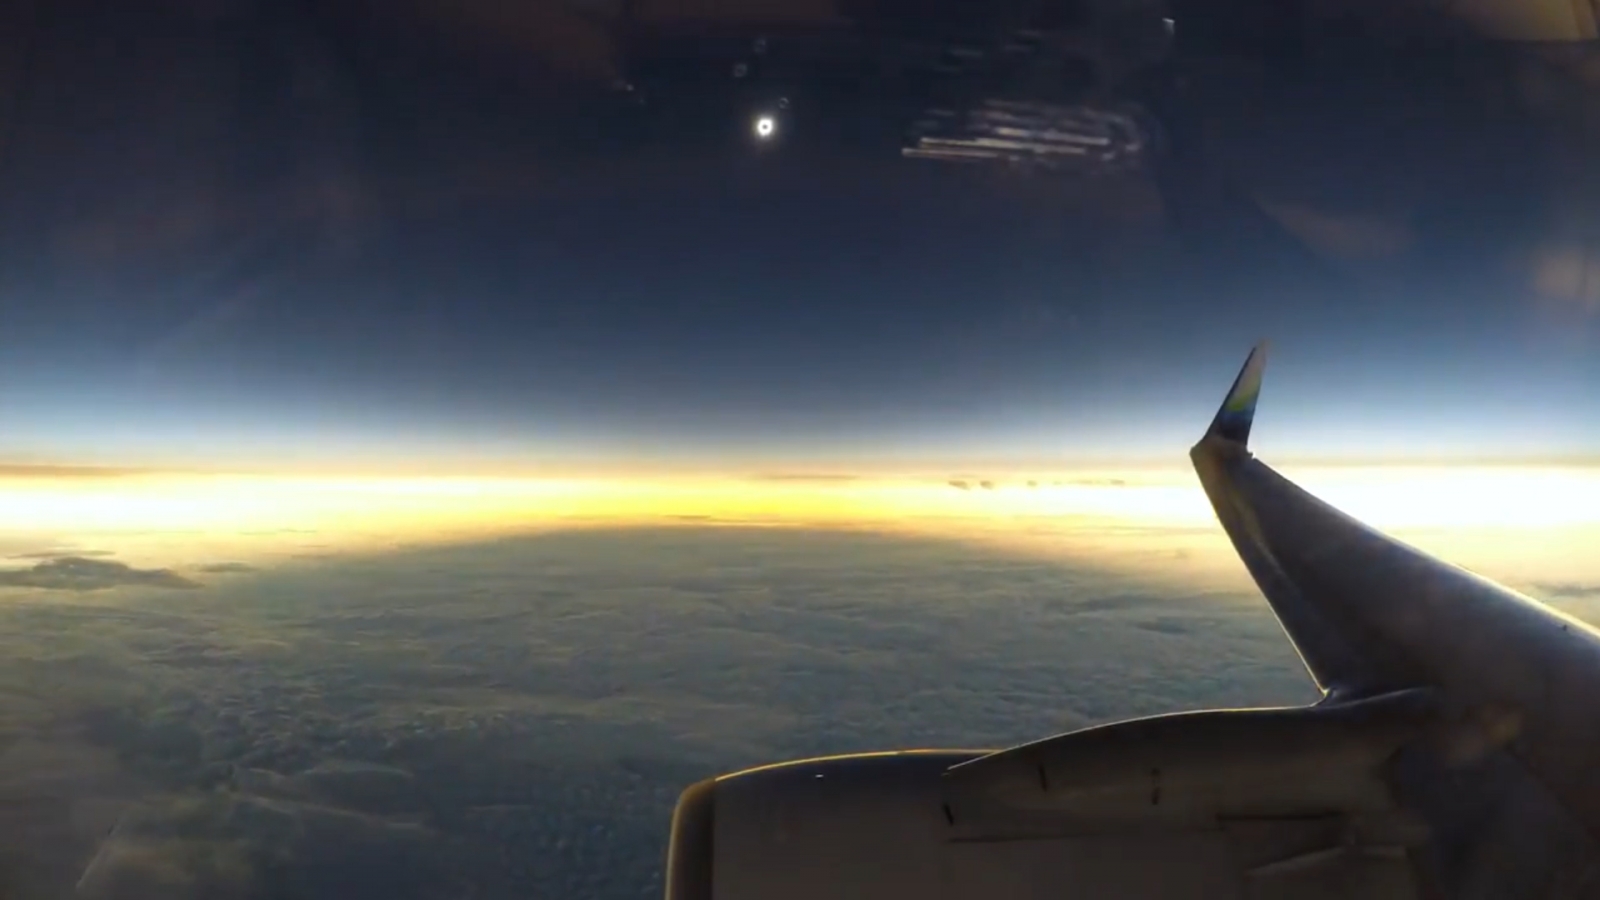 Stunning midflight video captures moment total solar eclipse plunges